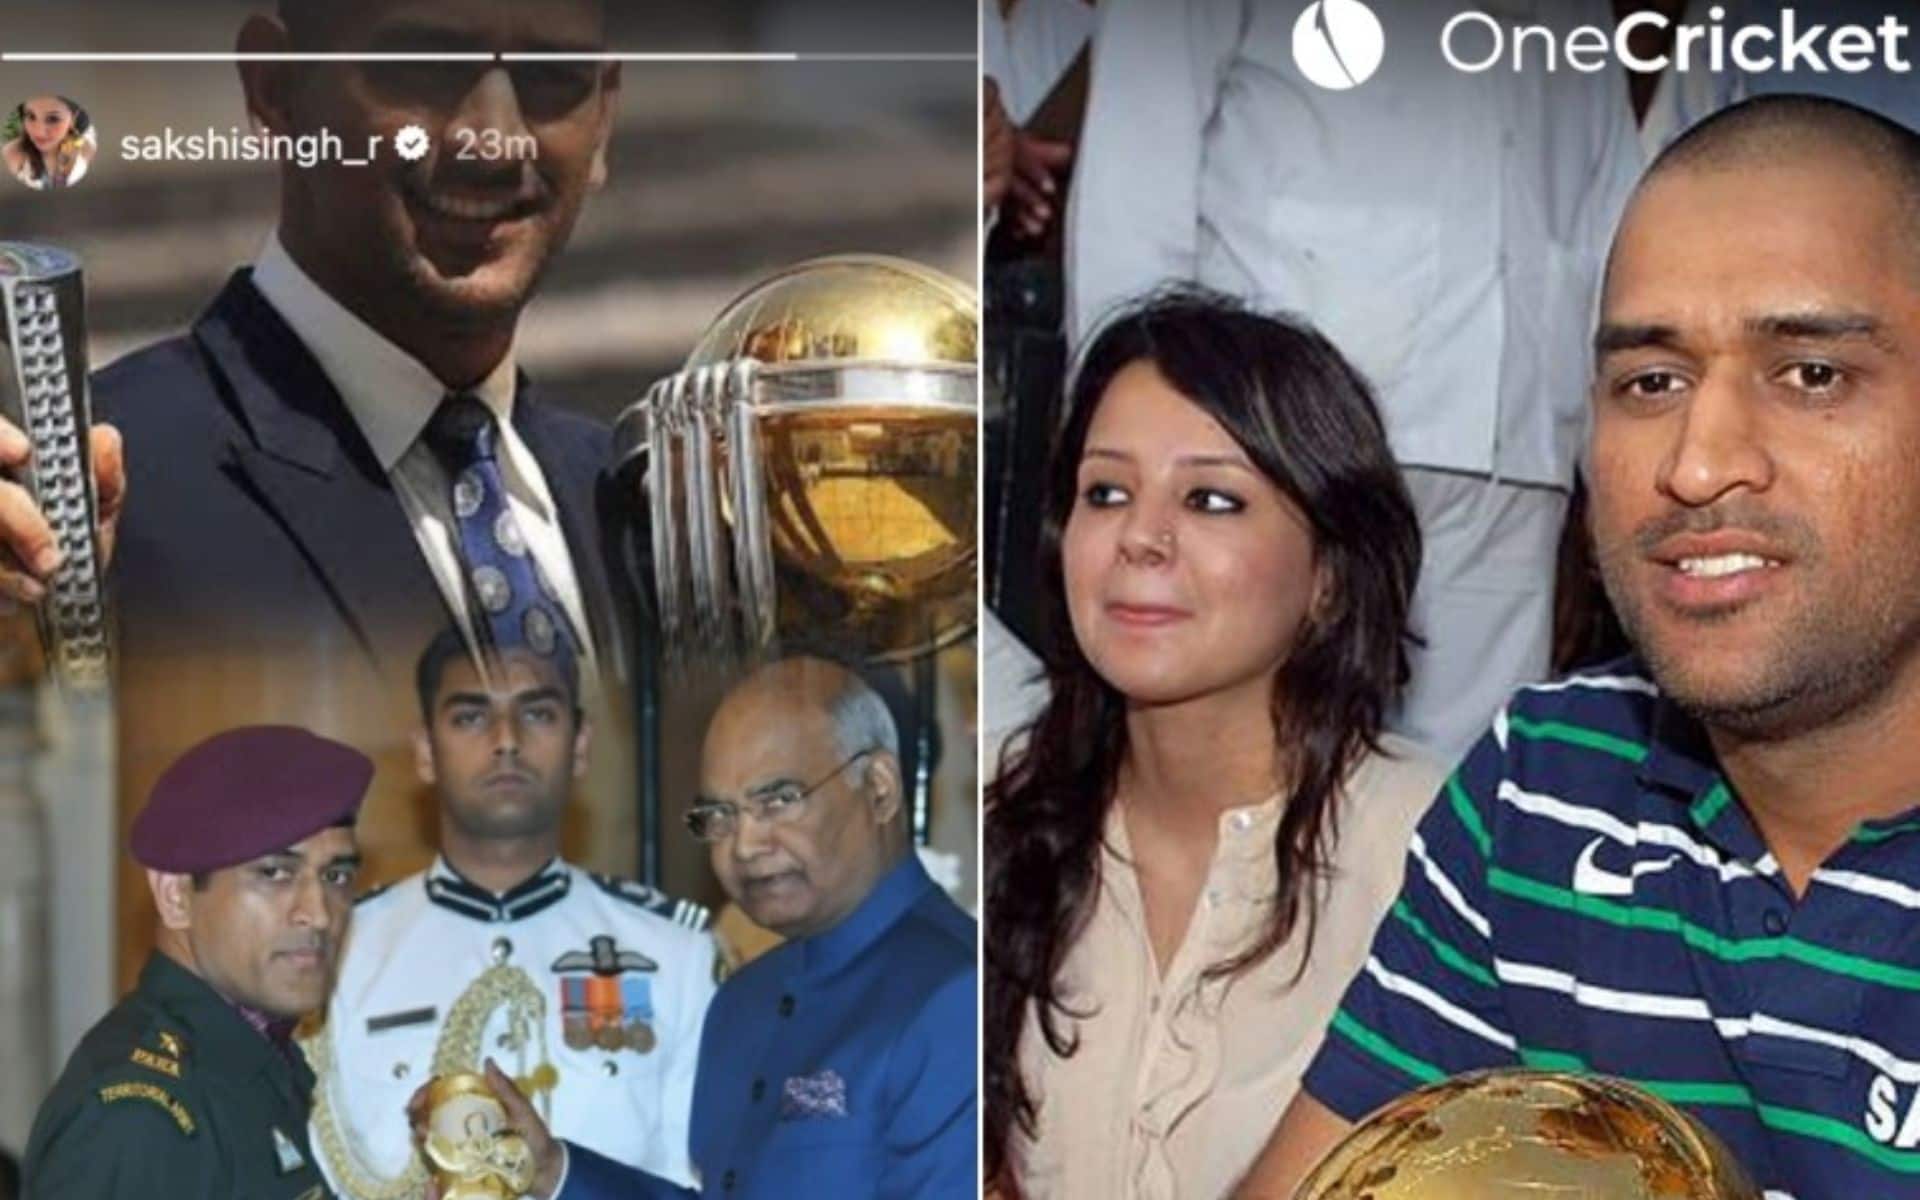 Sakshi Singh Reshares Unseen Image Of MS Dhoni After 2011 World Cup Triumph